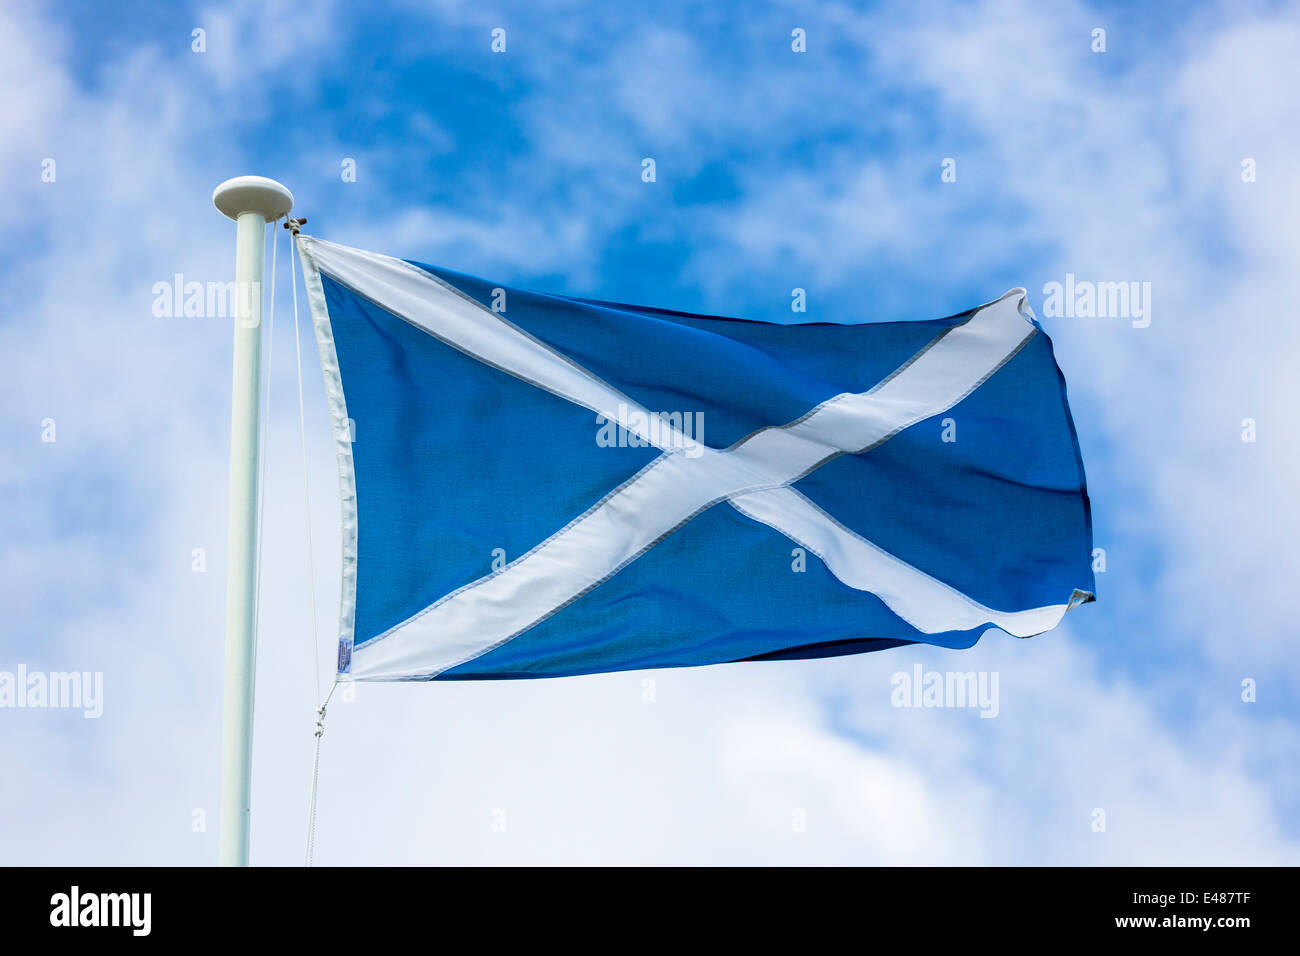 Saltire flag of St Andrew flying from flagpole as Scottish Referendum Independence campaign urges voters YES vote for SCOTLAND Stock Photo